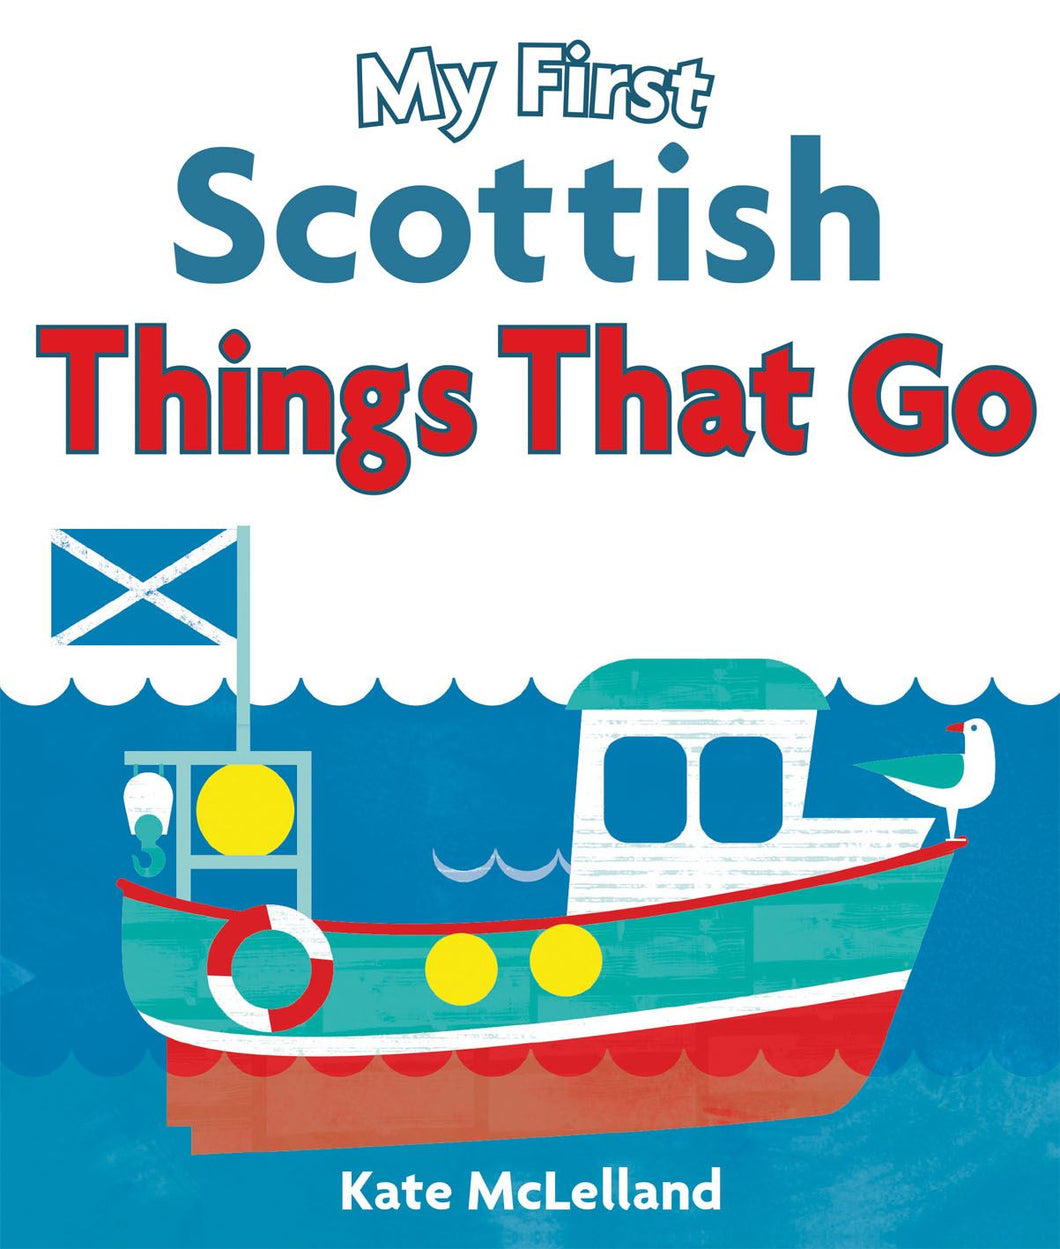 My First Scottish Things That Go